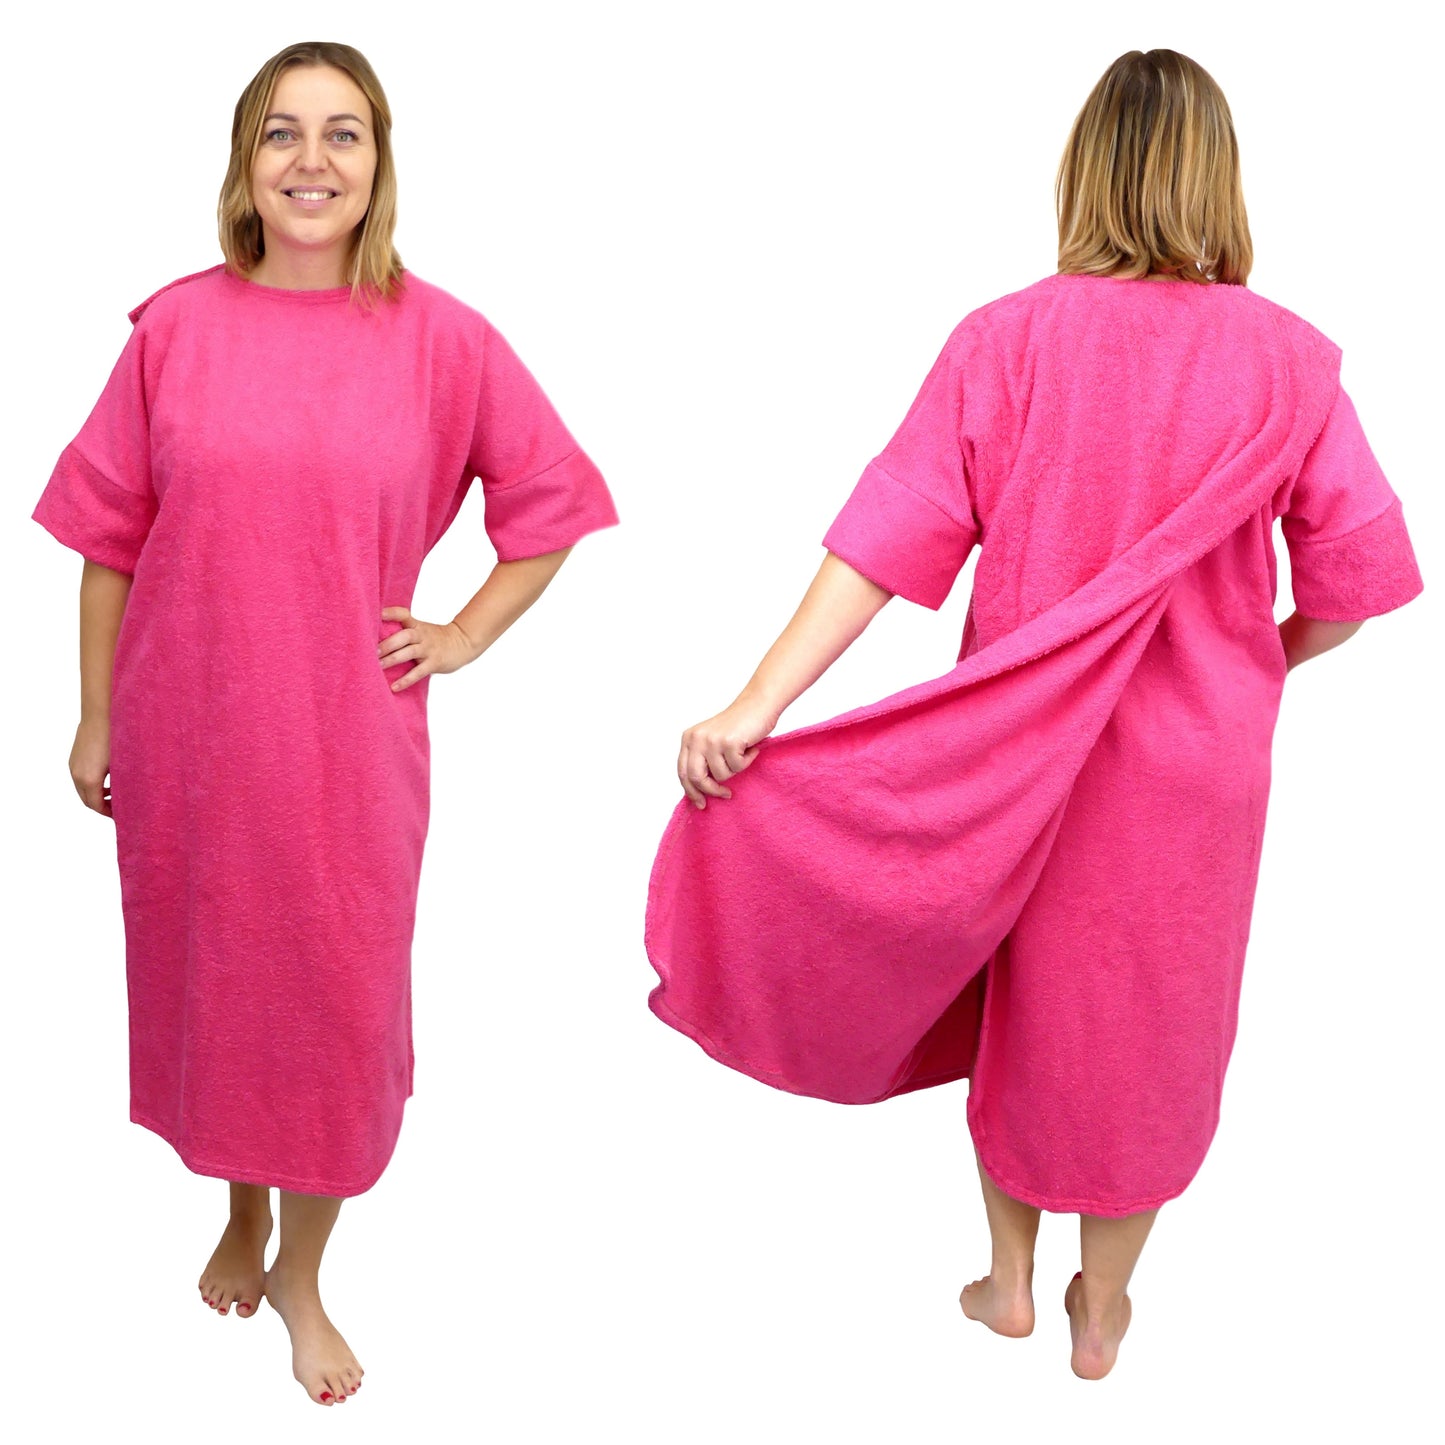 Unisex Adaptive Clothing: Complete Open Back Dri-Me Towelling Shower Robe - M176